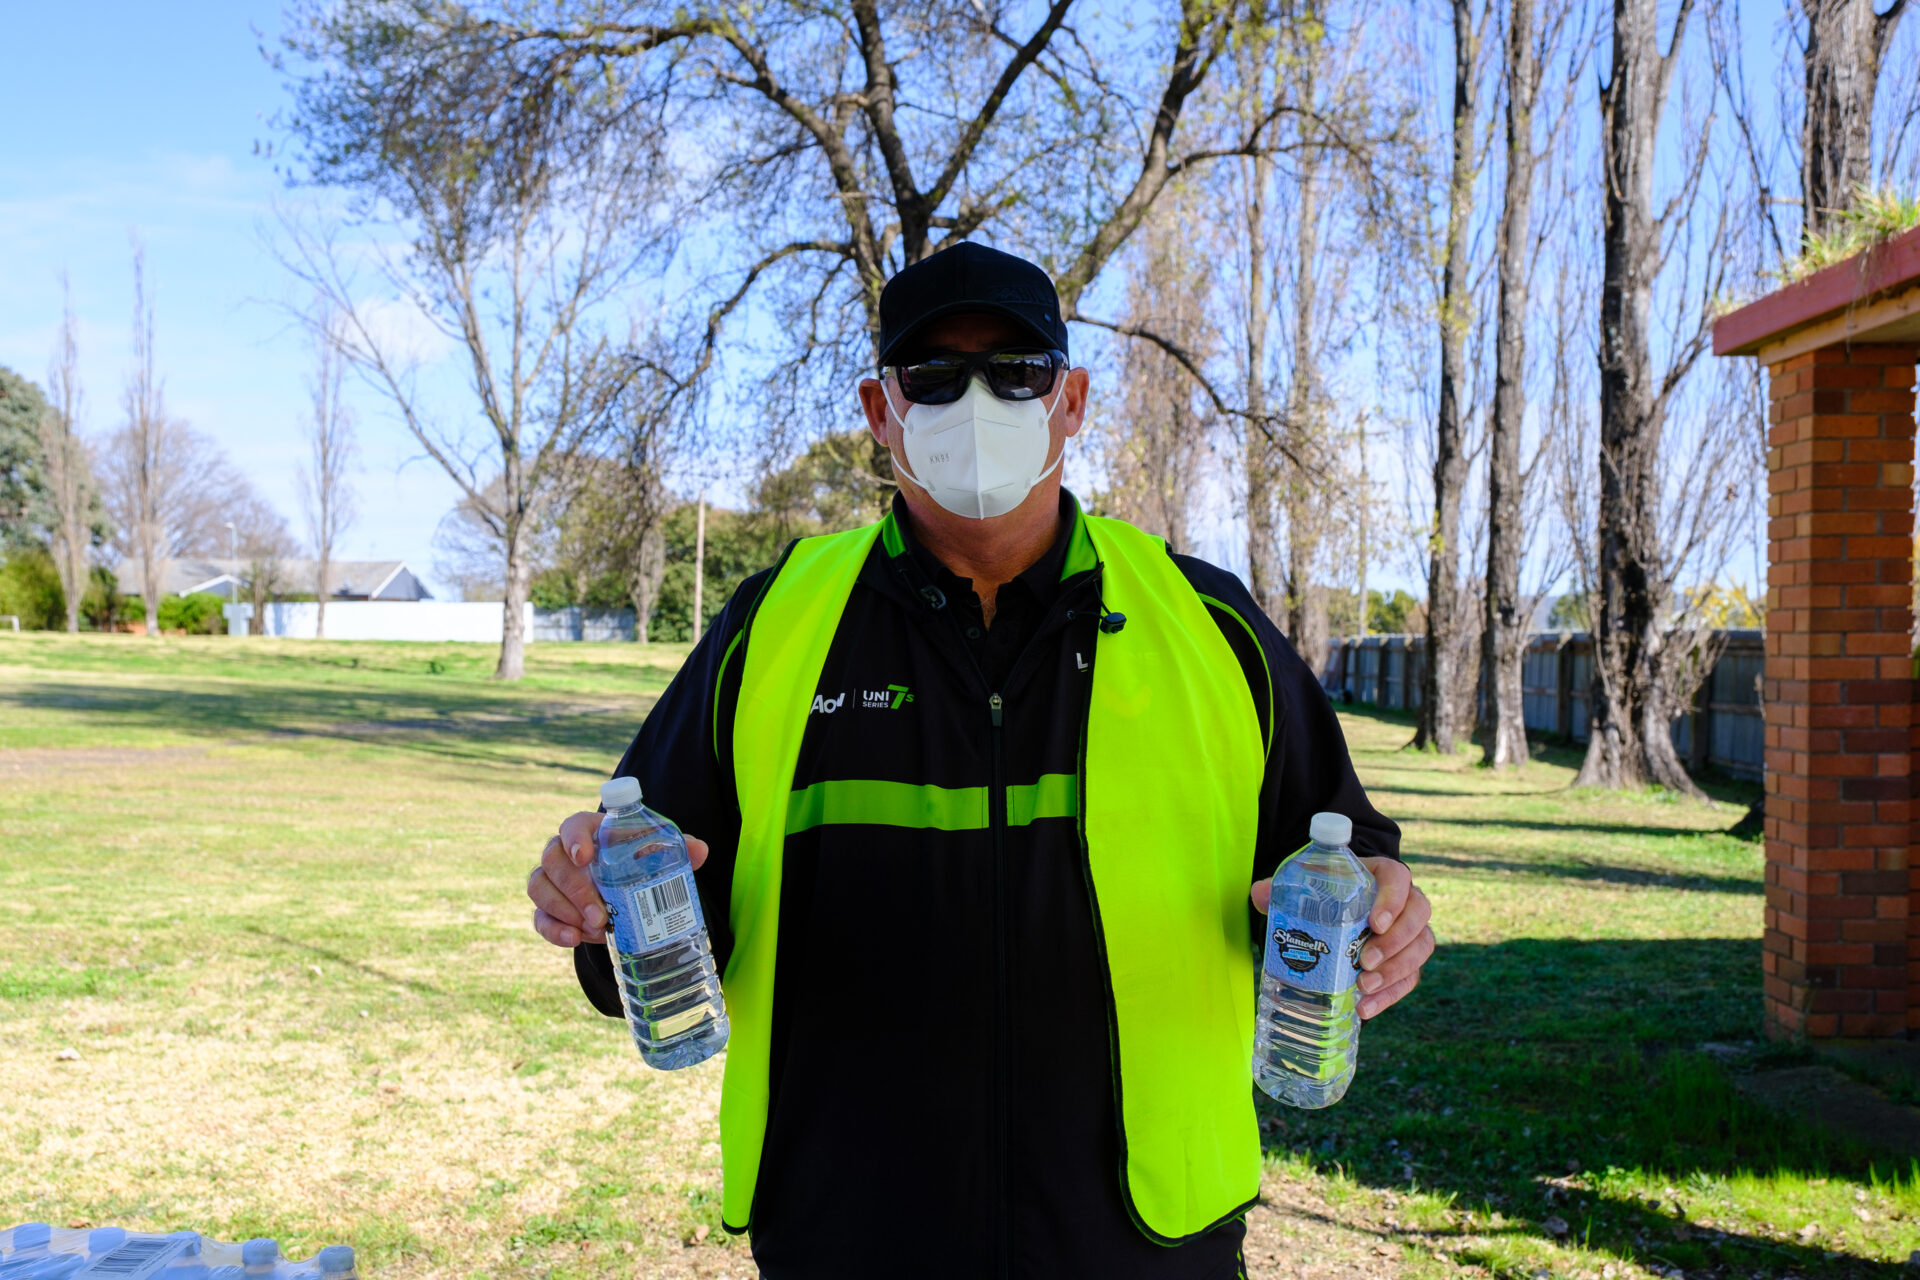 Alan stand holding two water bottles and smiling at the camera whilst wearing a high-vis vest and mask